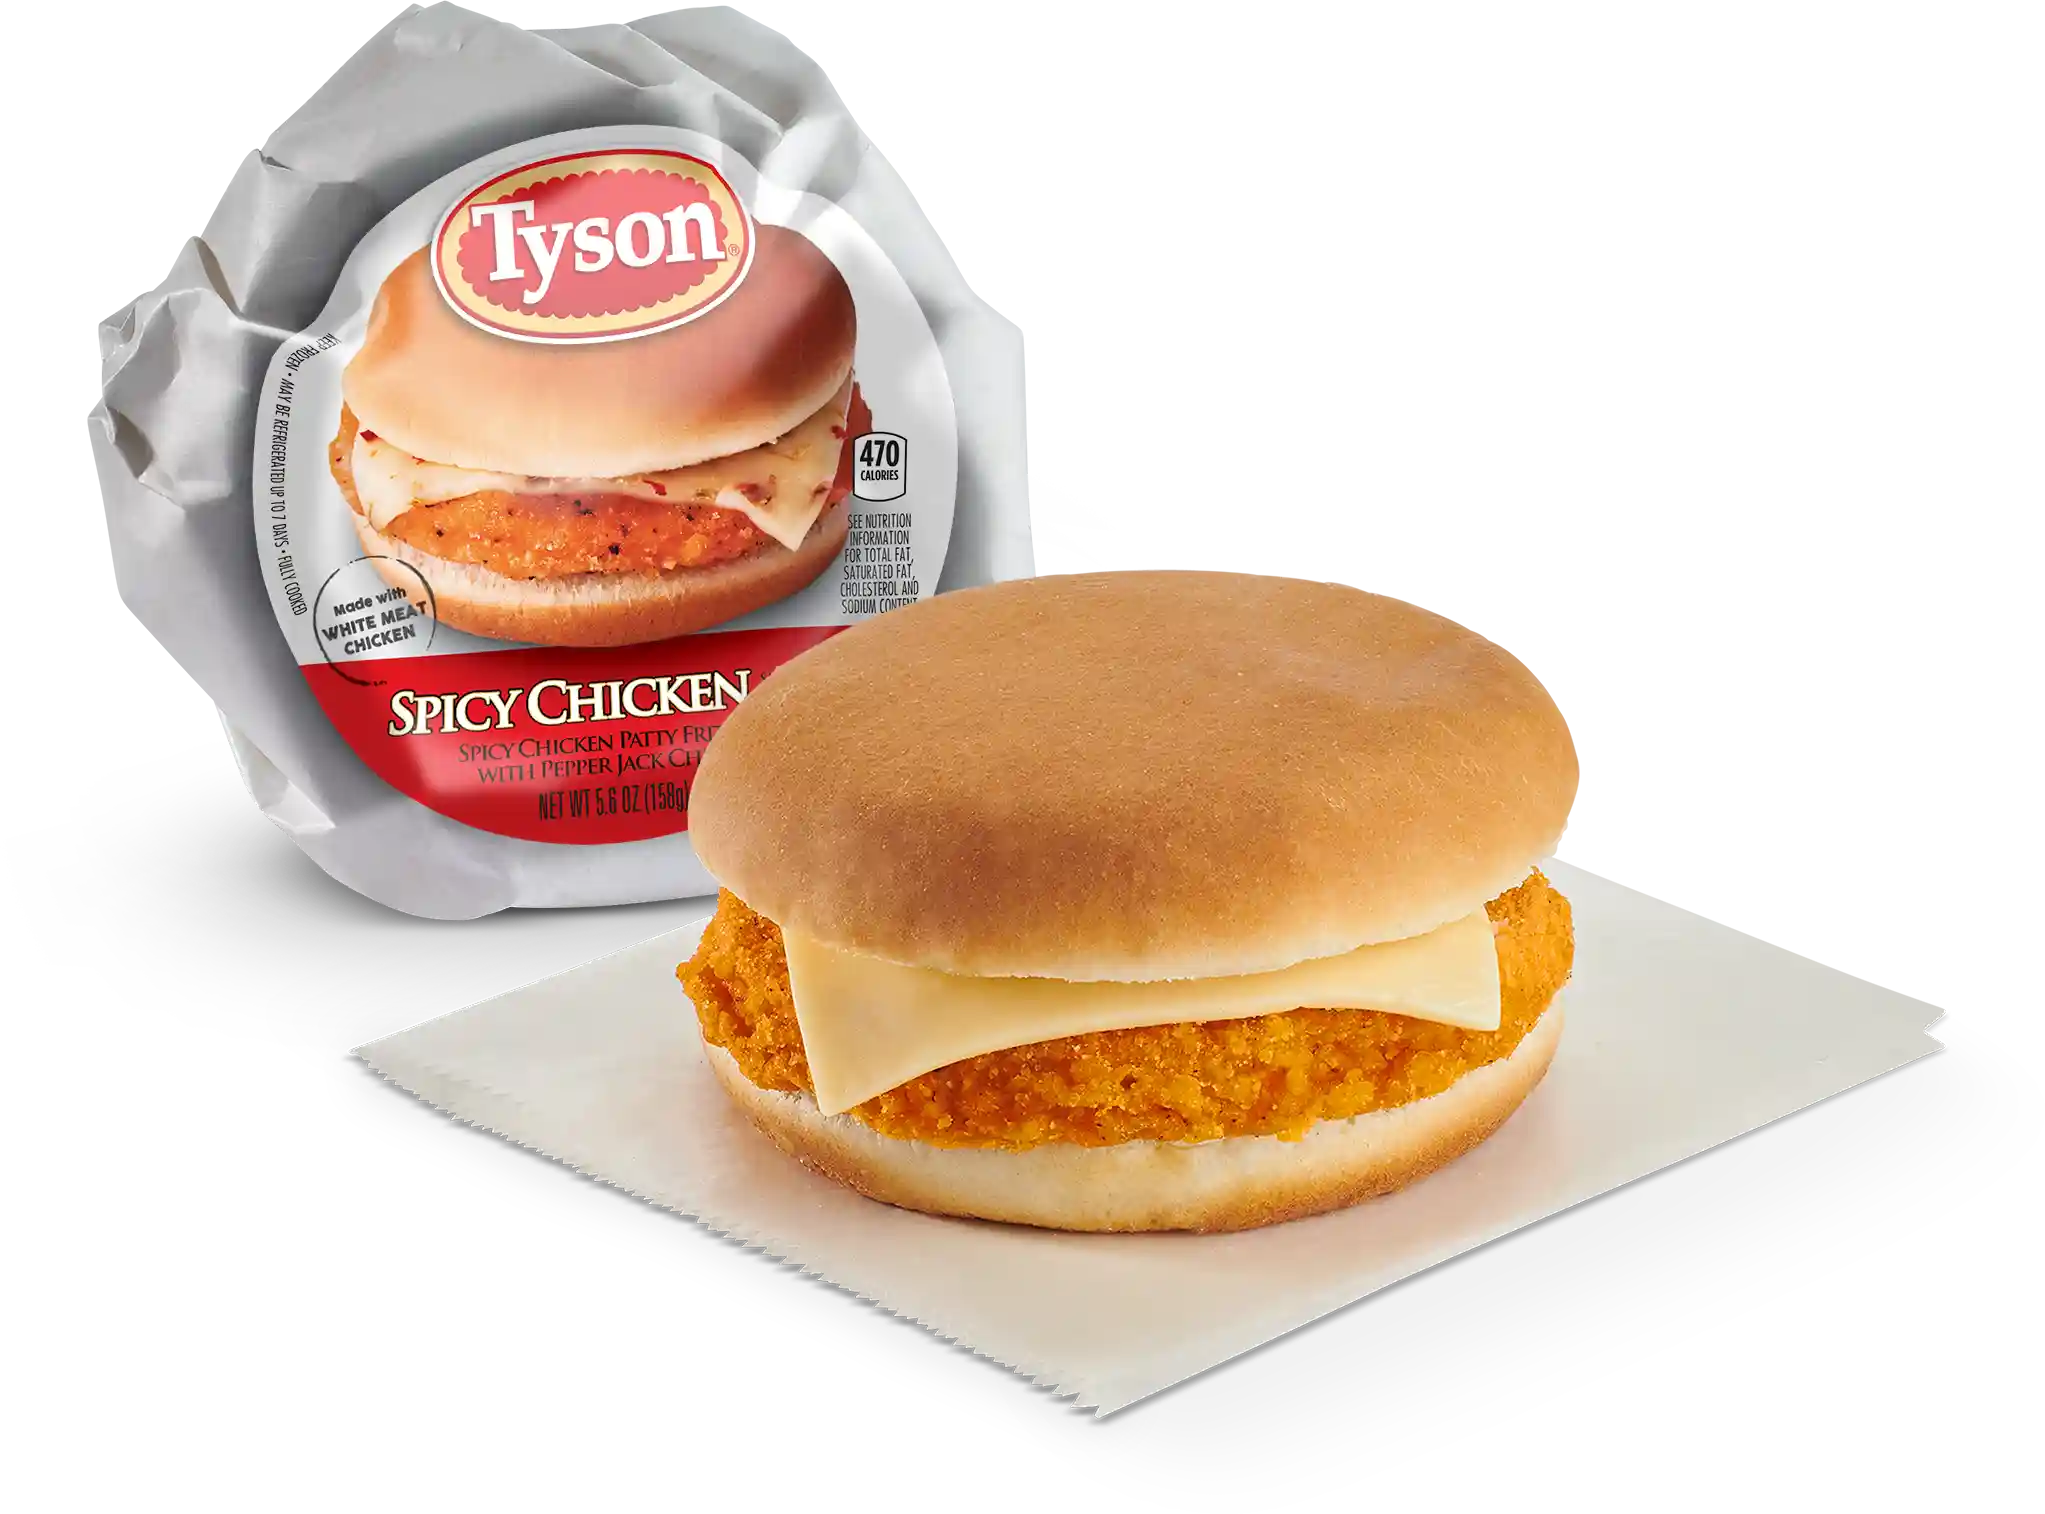 Tyson® Spicy Chicken Sandwich with Pepper Jack Cheese on a Bun_image_01